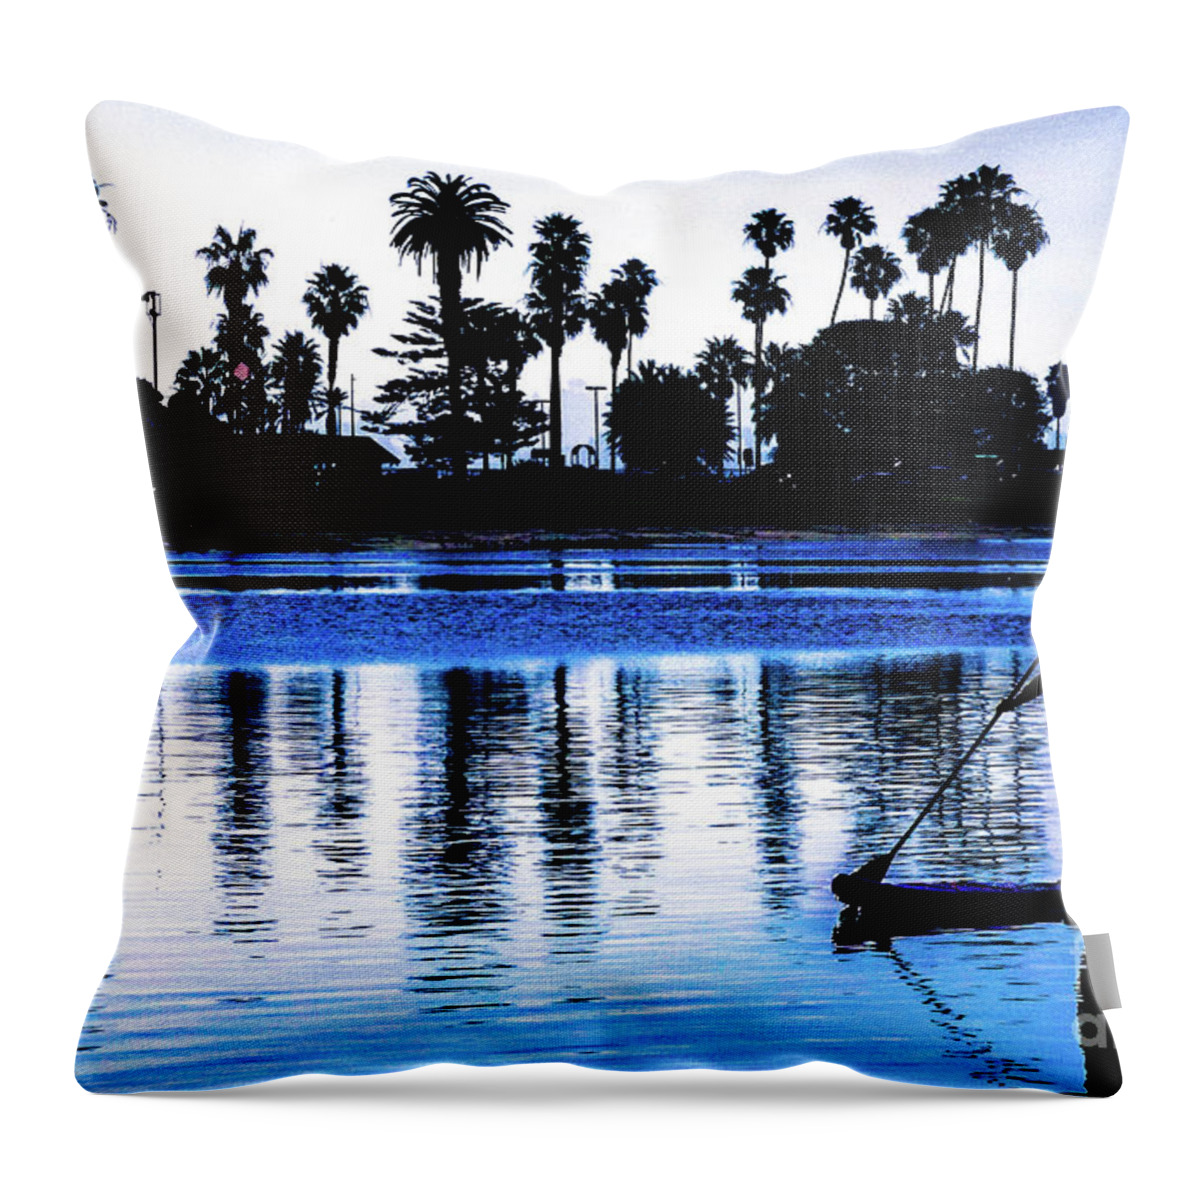 San Diego Throw Pillow featuring the photograph Blue Lagoon by Darcy Dietrich